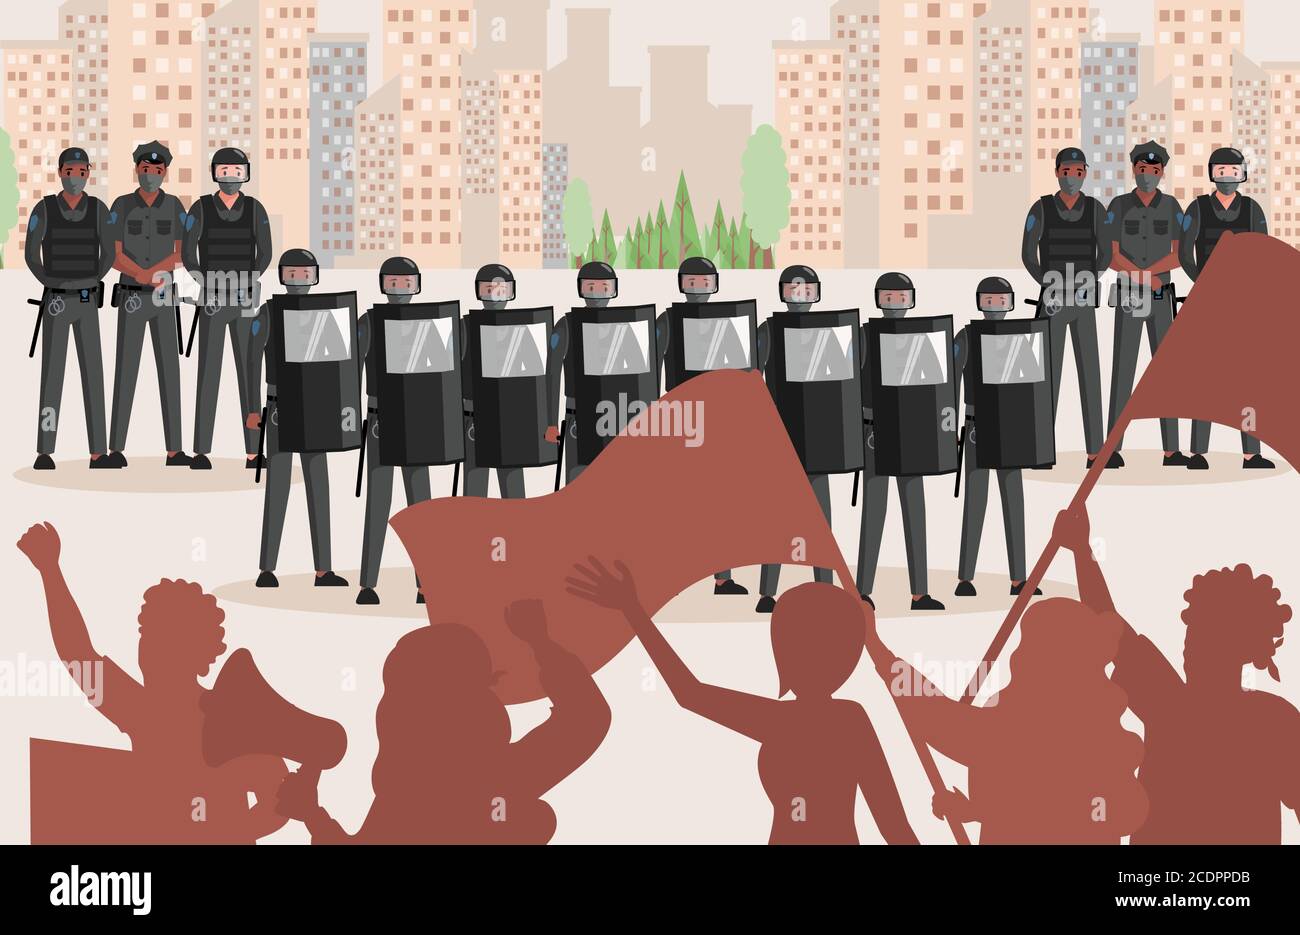 Police officers in uniform against protesting people vector flat illustration. People holding flags and loudspeakers protest against injustice, police workers protect city against destruction. Stock Vector